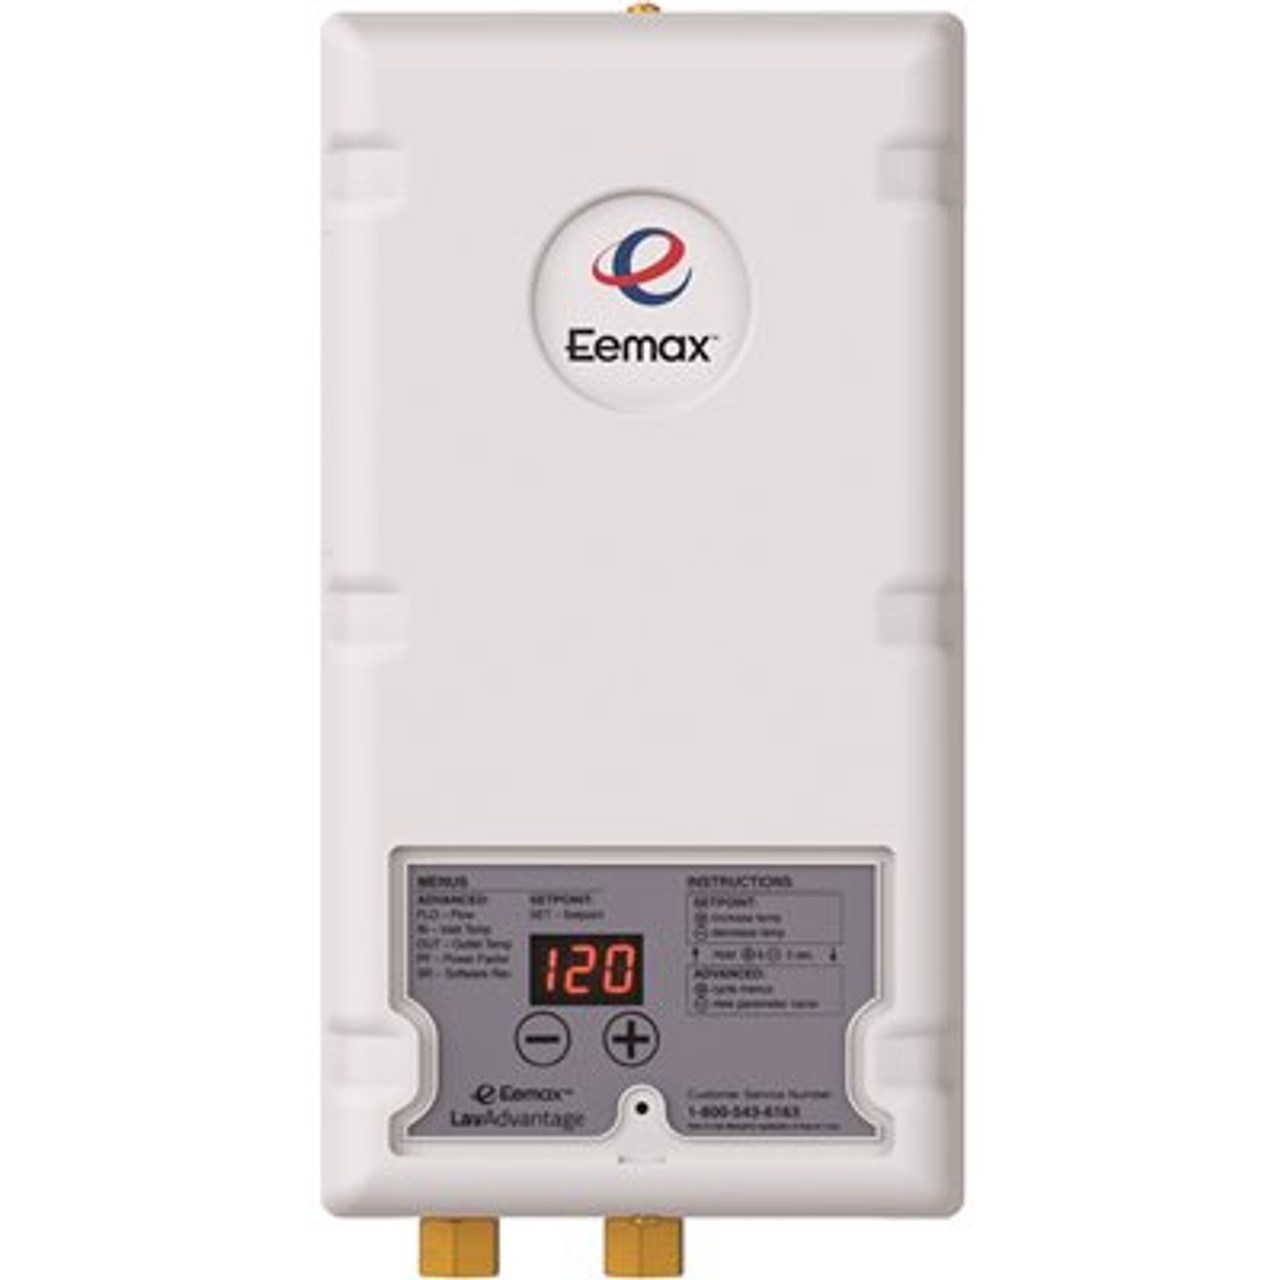 Eemax LavAdvantage 4.1 kW, 208 Volt Commercial Electric Tankless Water Heater, Thermostatic